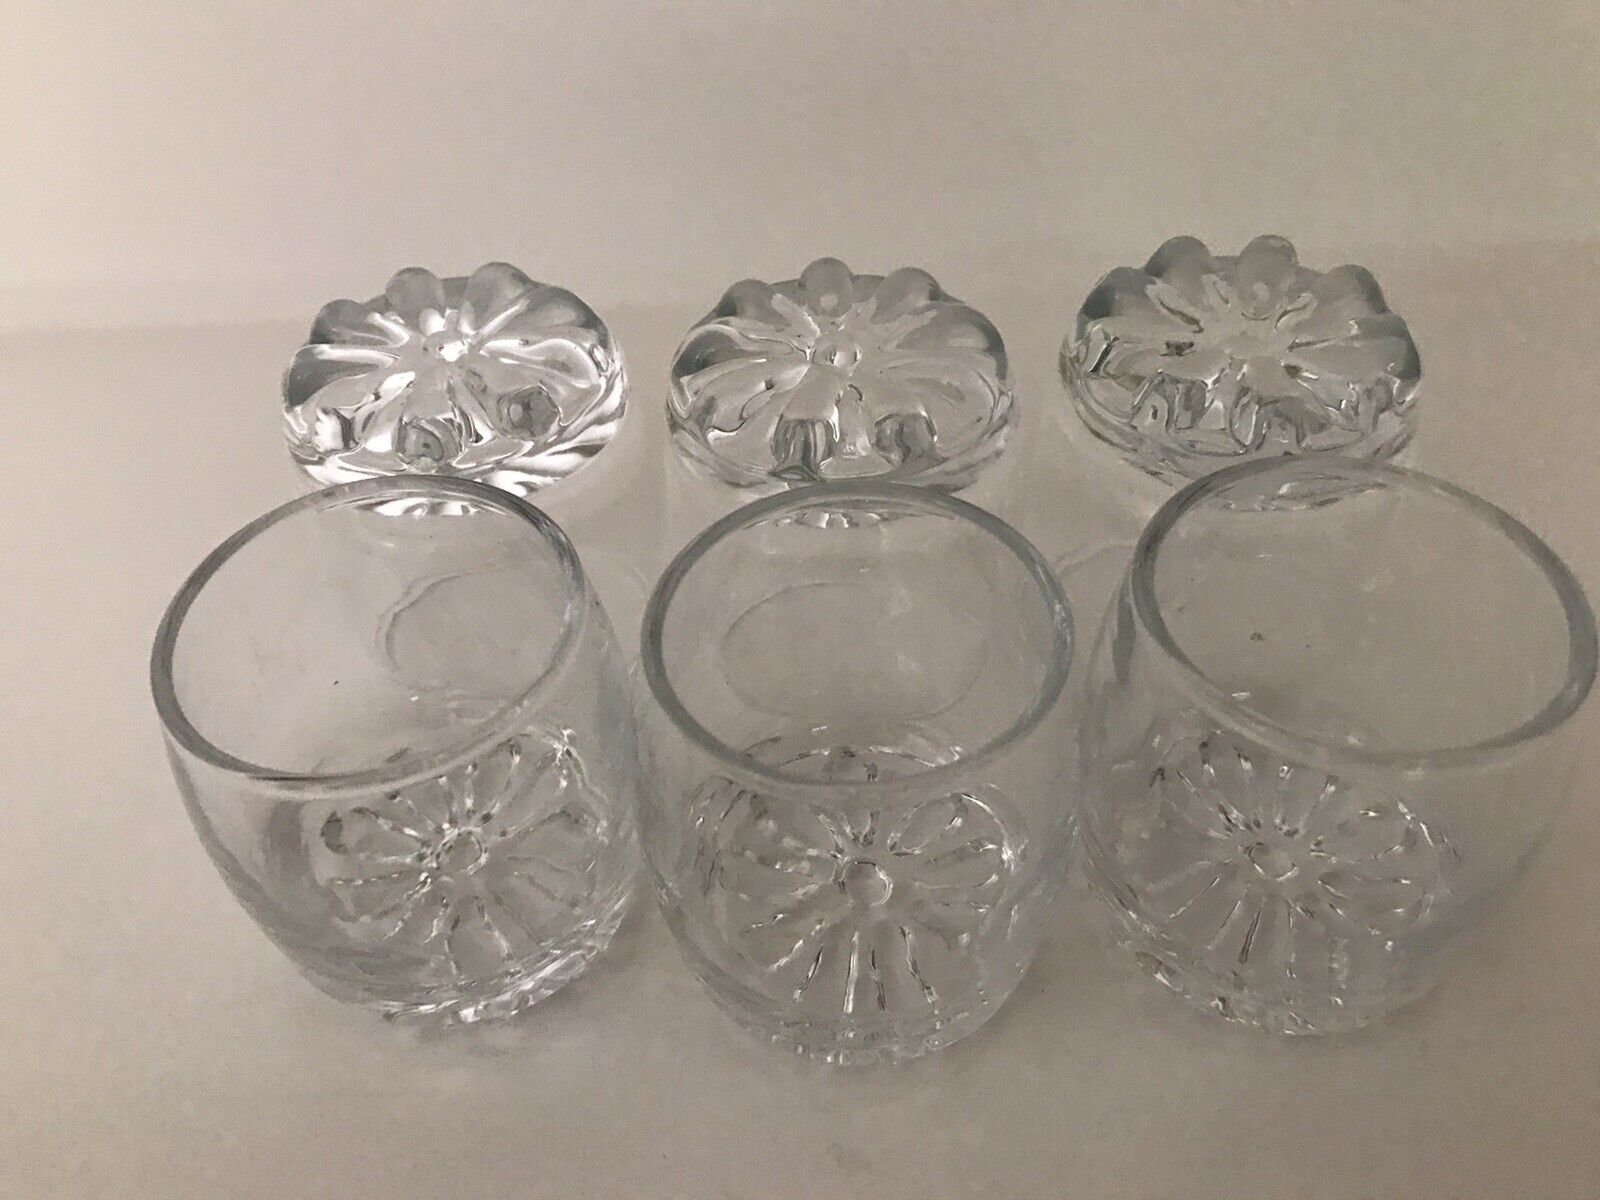 Circleware Set of 6 Clear 2oz Follie Shot Glasses, Footed Flower Design